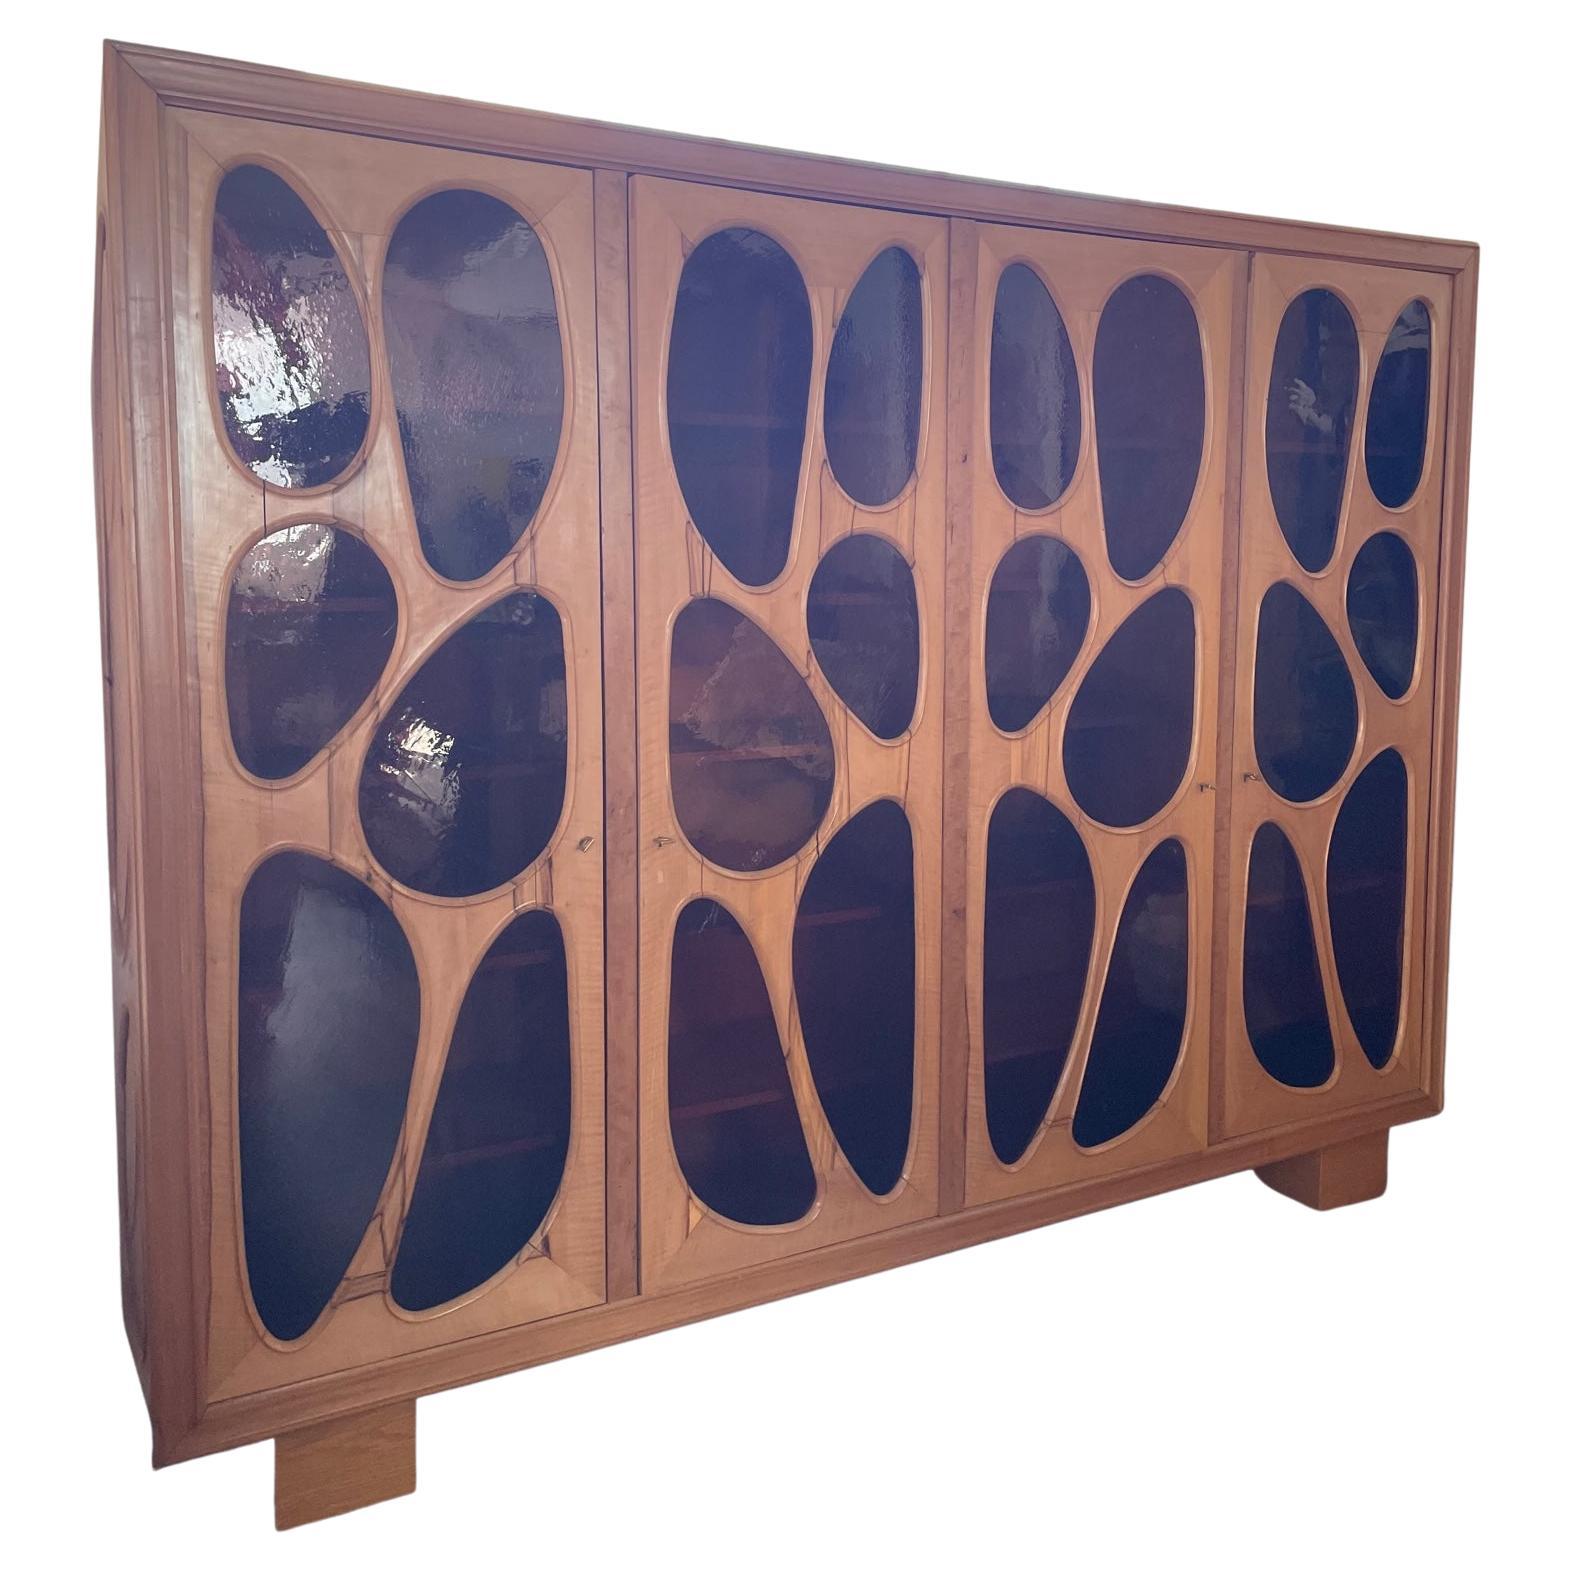 20th Century Fruitwood Bibliotheque or Vitrine by Vincent Gonzalez, 1960s For Sale